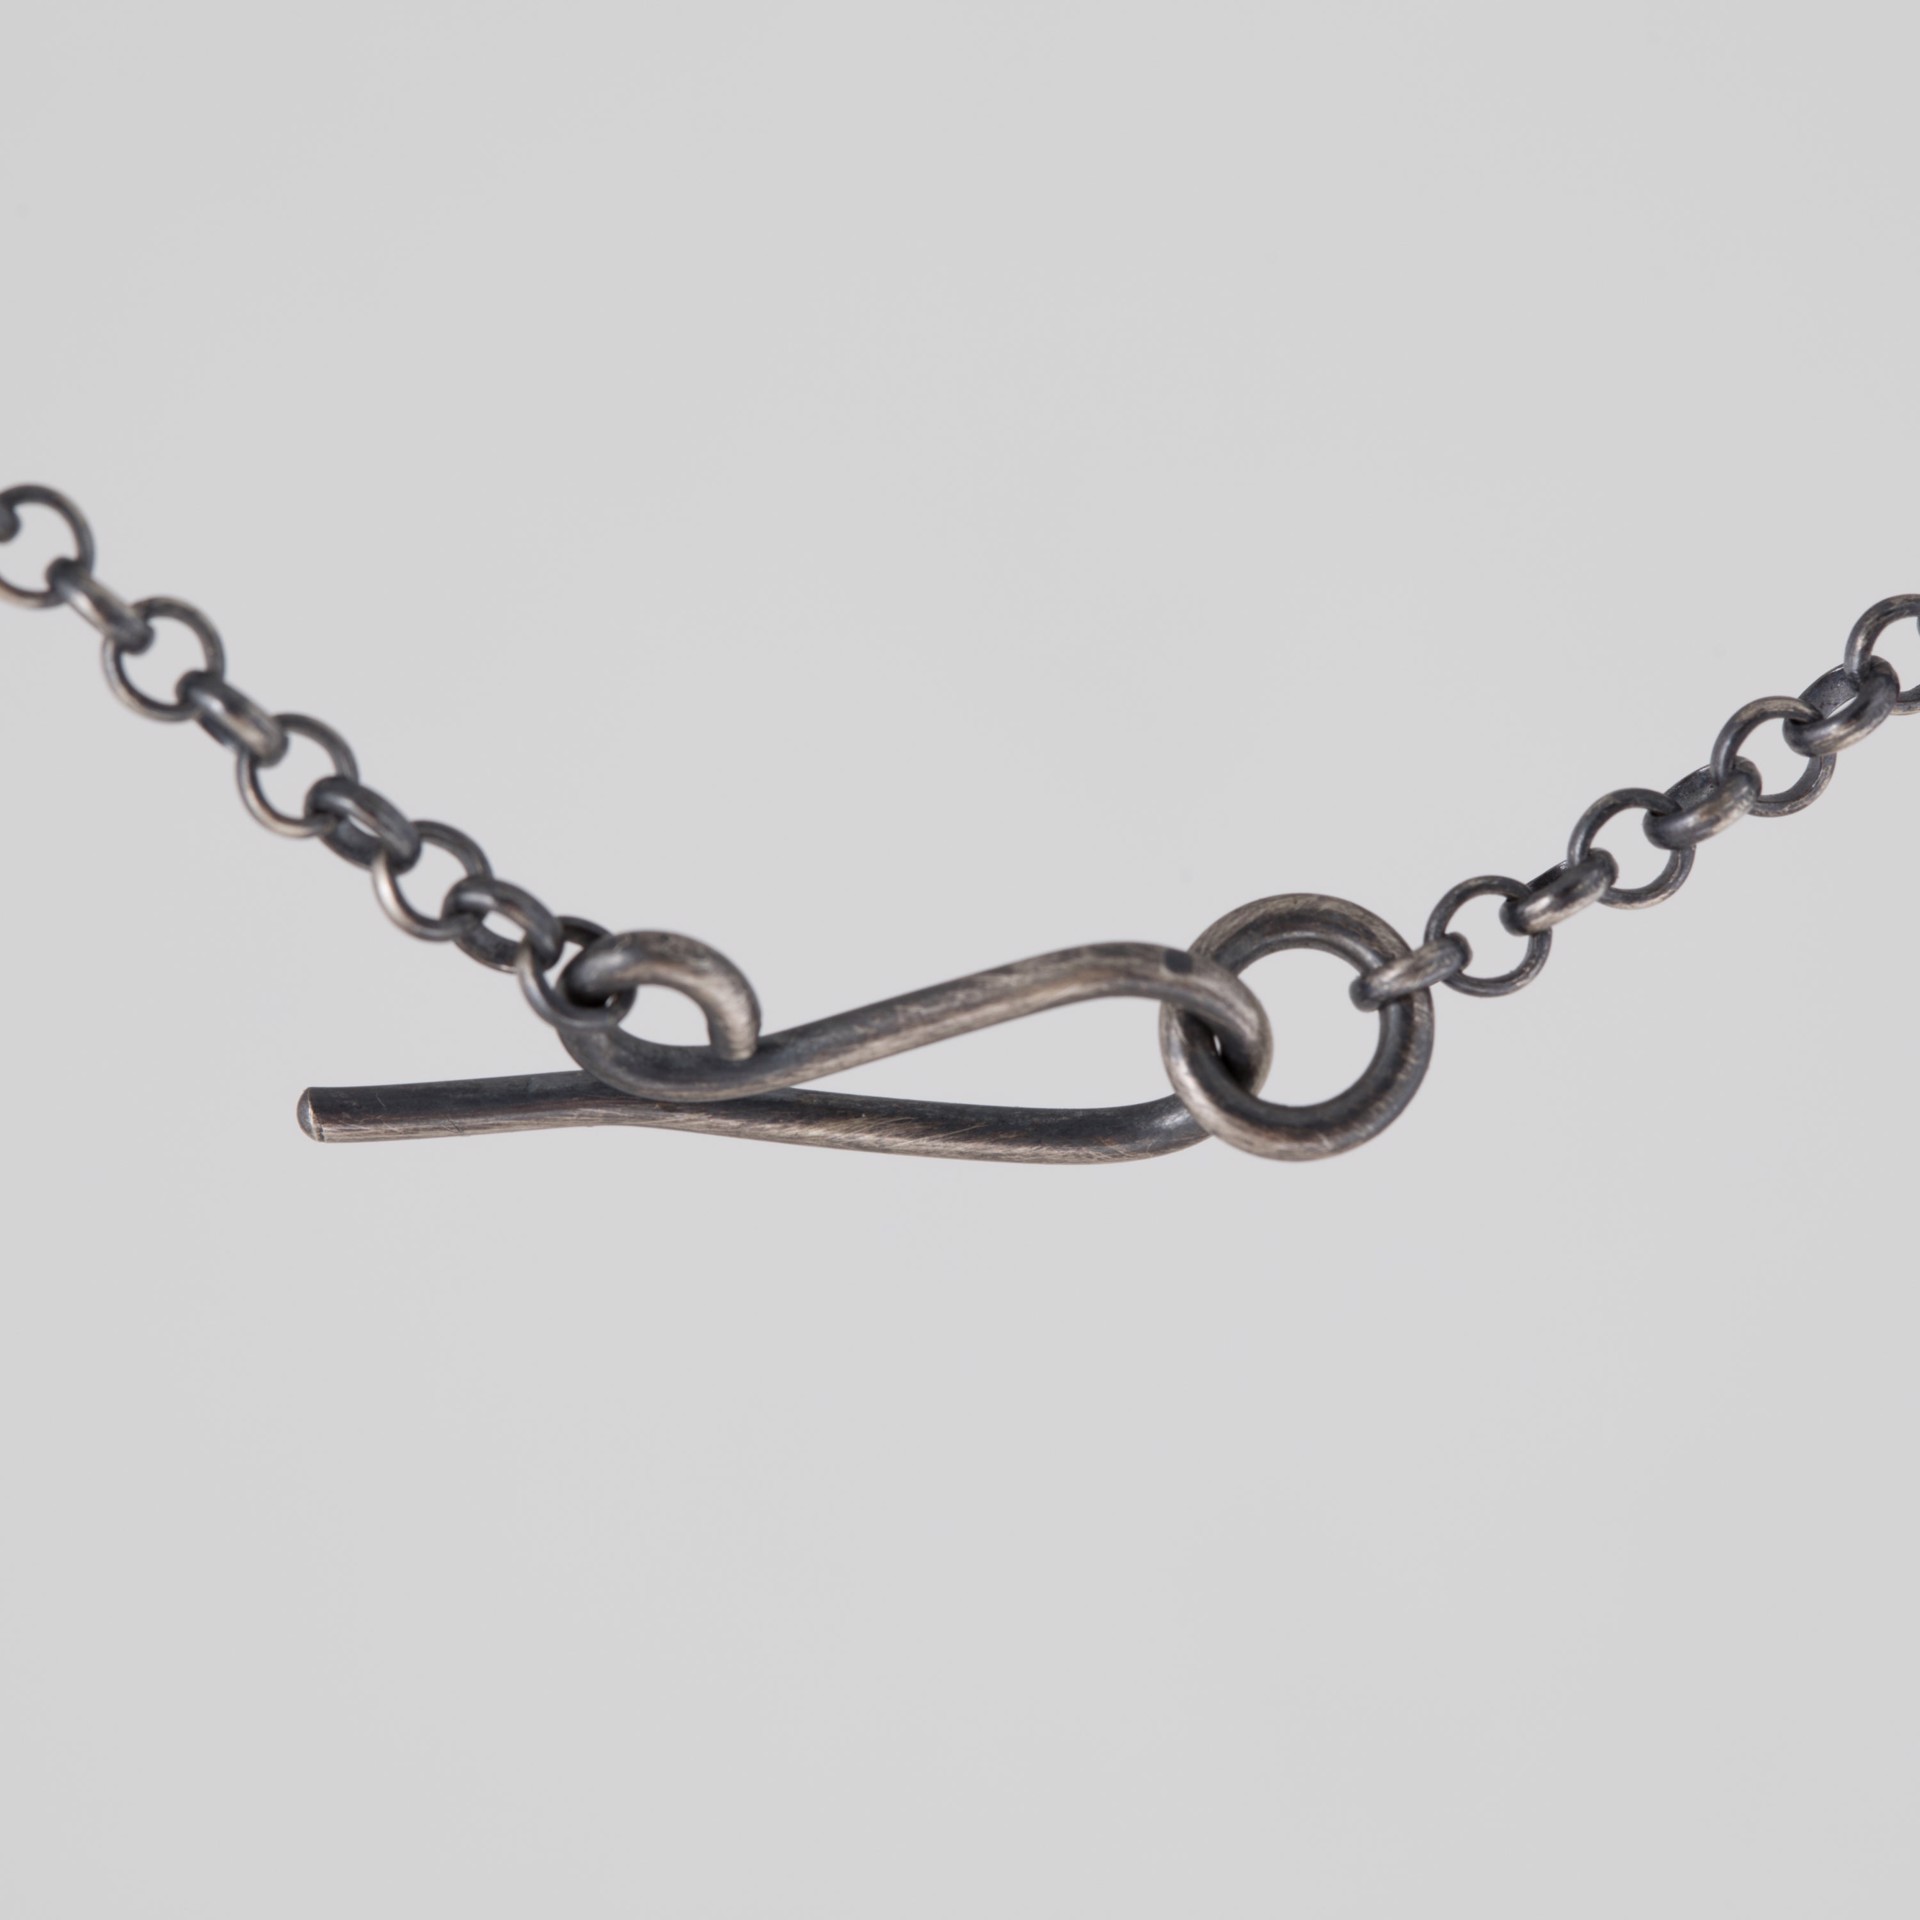 Banner Necklace in Silver by Clementine & Co. Jewelry